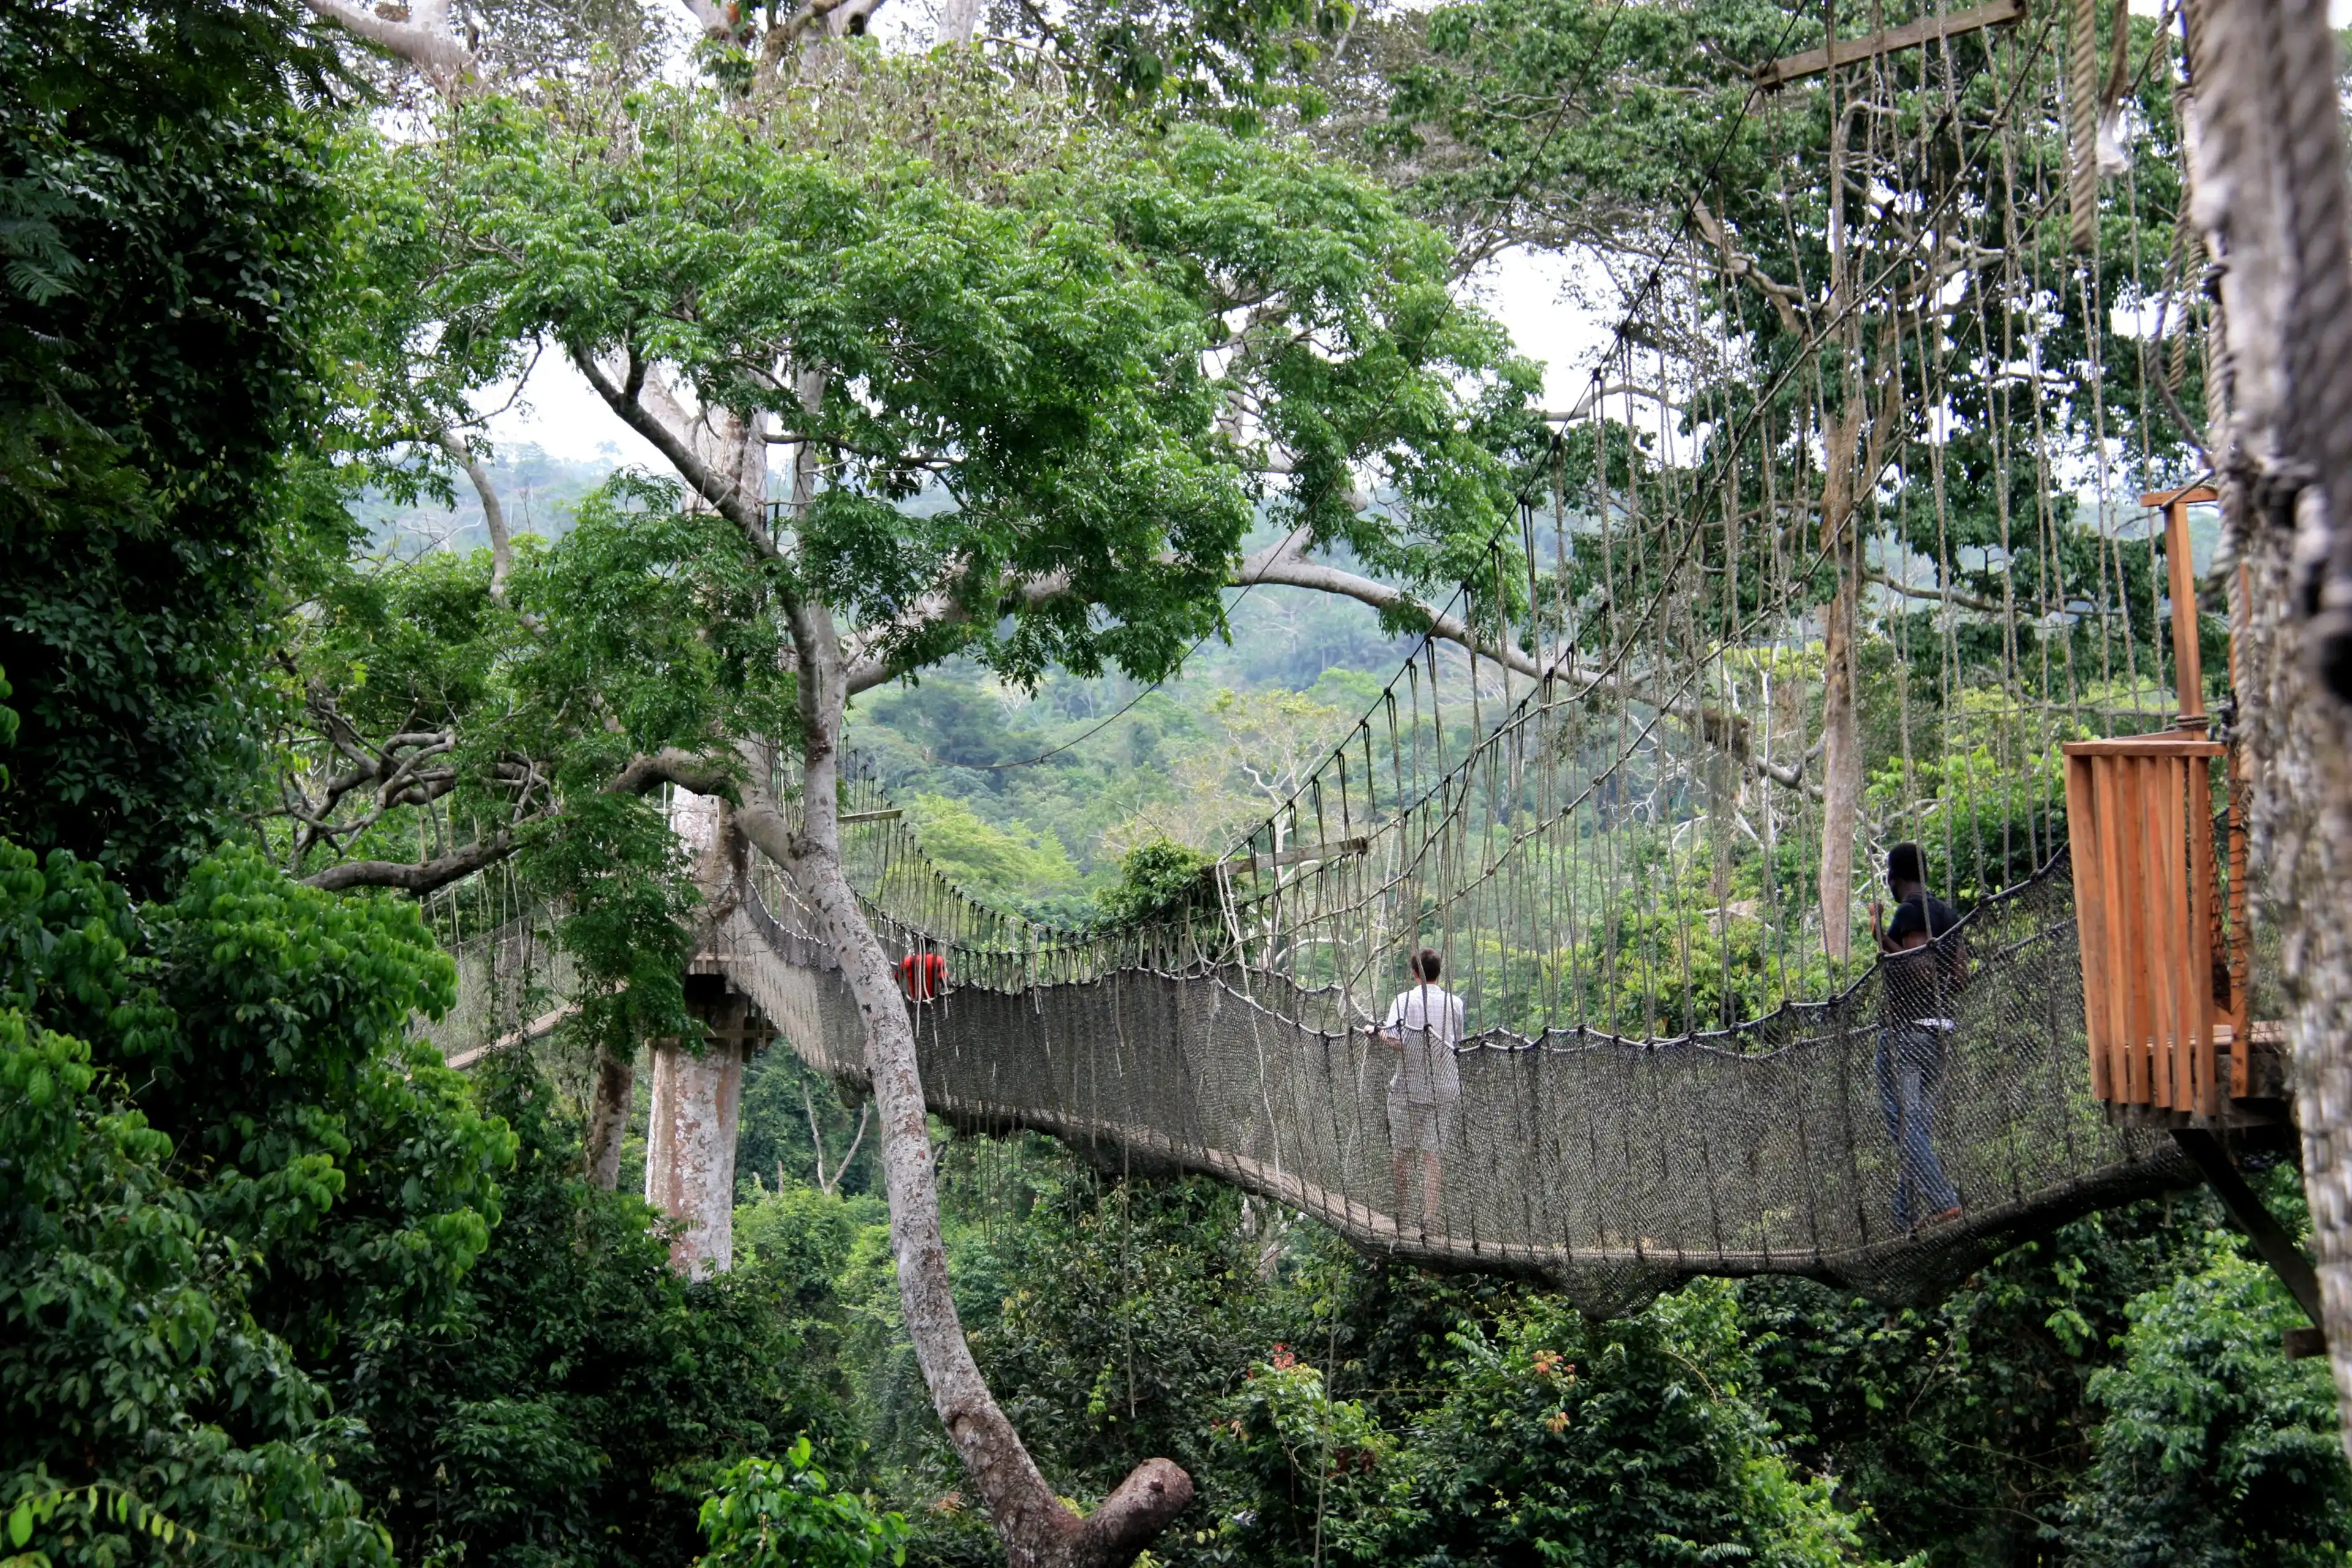 Kakum National Park, Ghana - March 10th 2013: Tourists exploring the upper level of the rain forest while walking across rope bridges of the Canopy Walkway at the Kakum National Park near Cape Coast